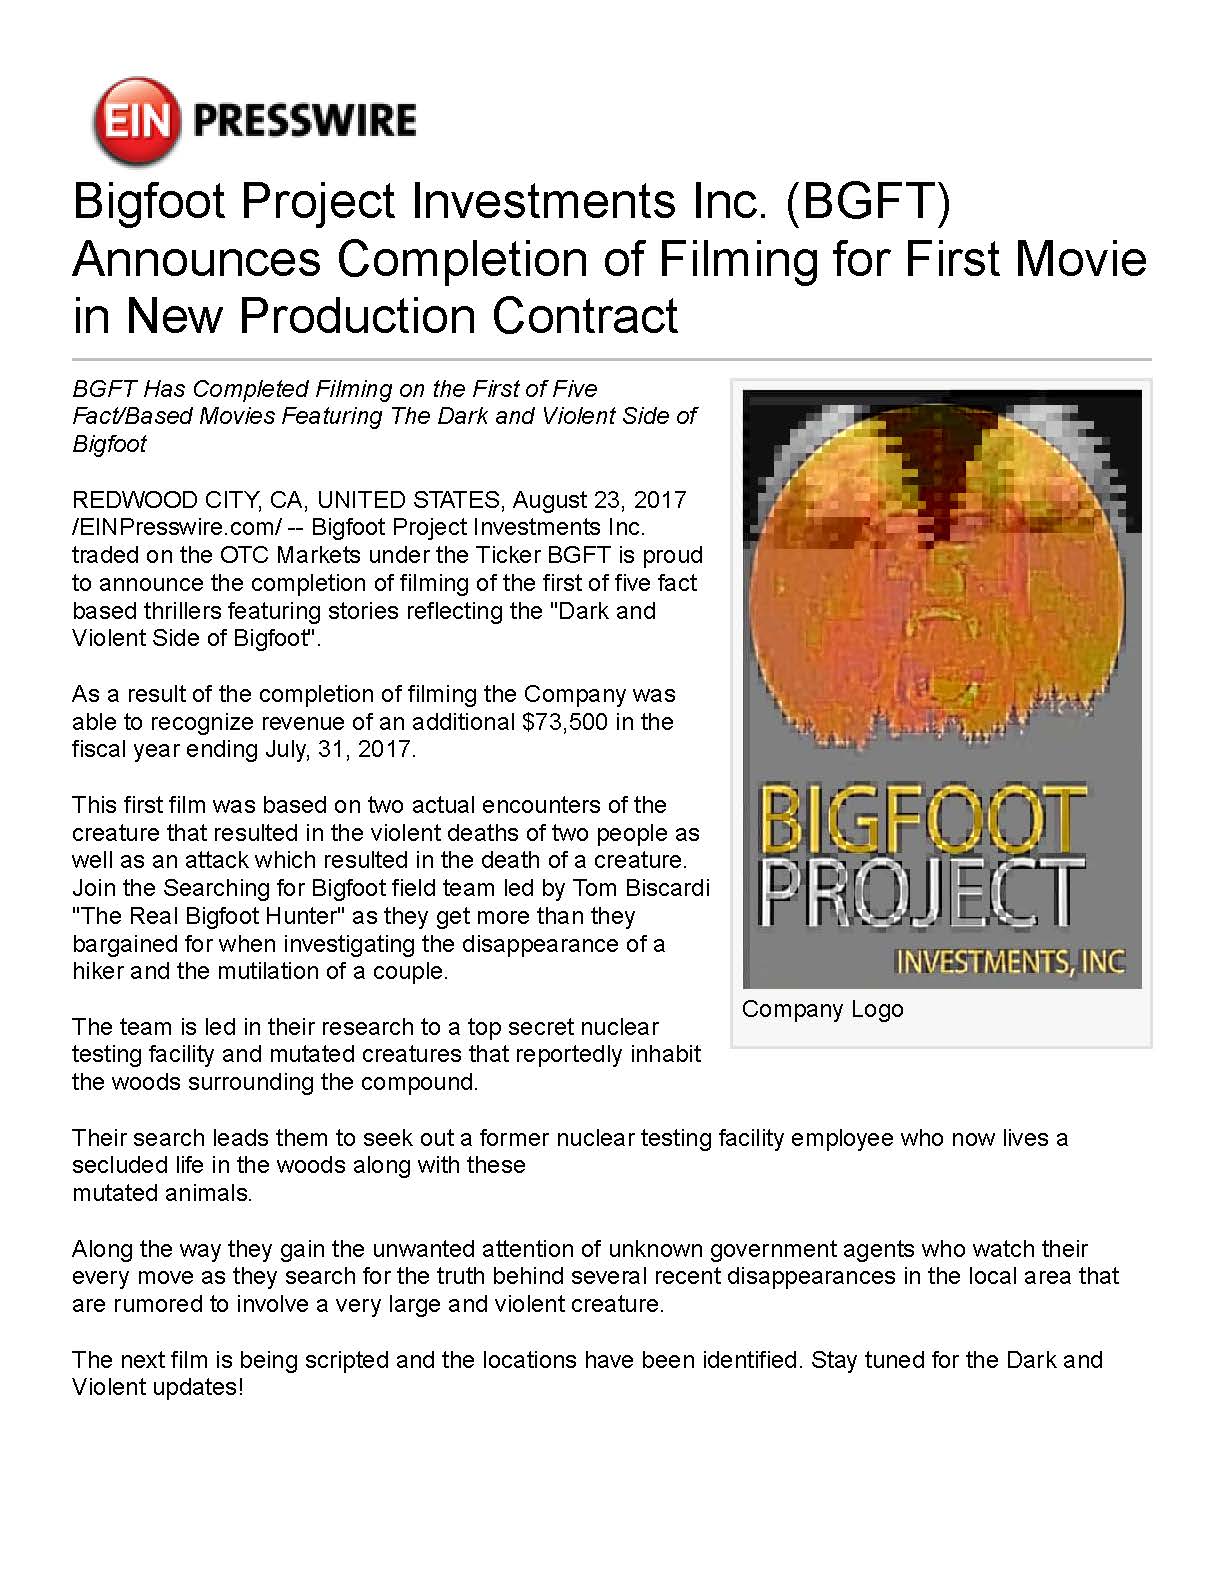 EINPresswire-398720052-bigfoot-project-investments-inc-bgft-announces-completion-of-filming-for-first-movie-in-new-production-contract 1_Page_1.jpg